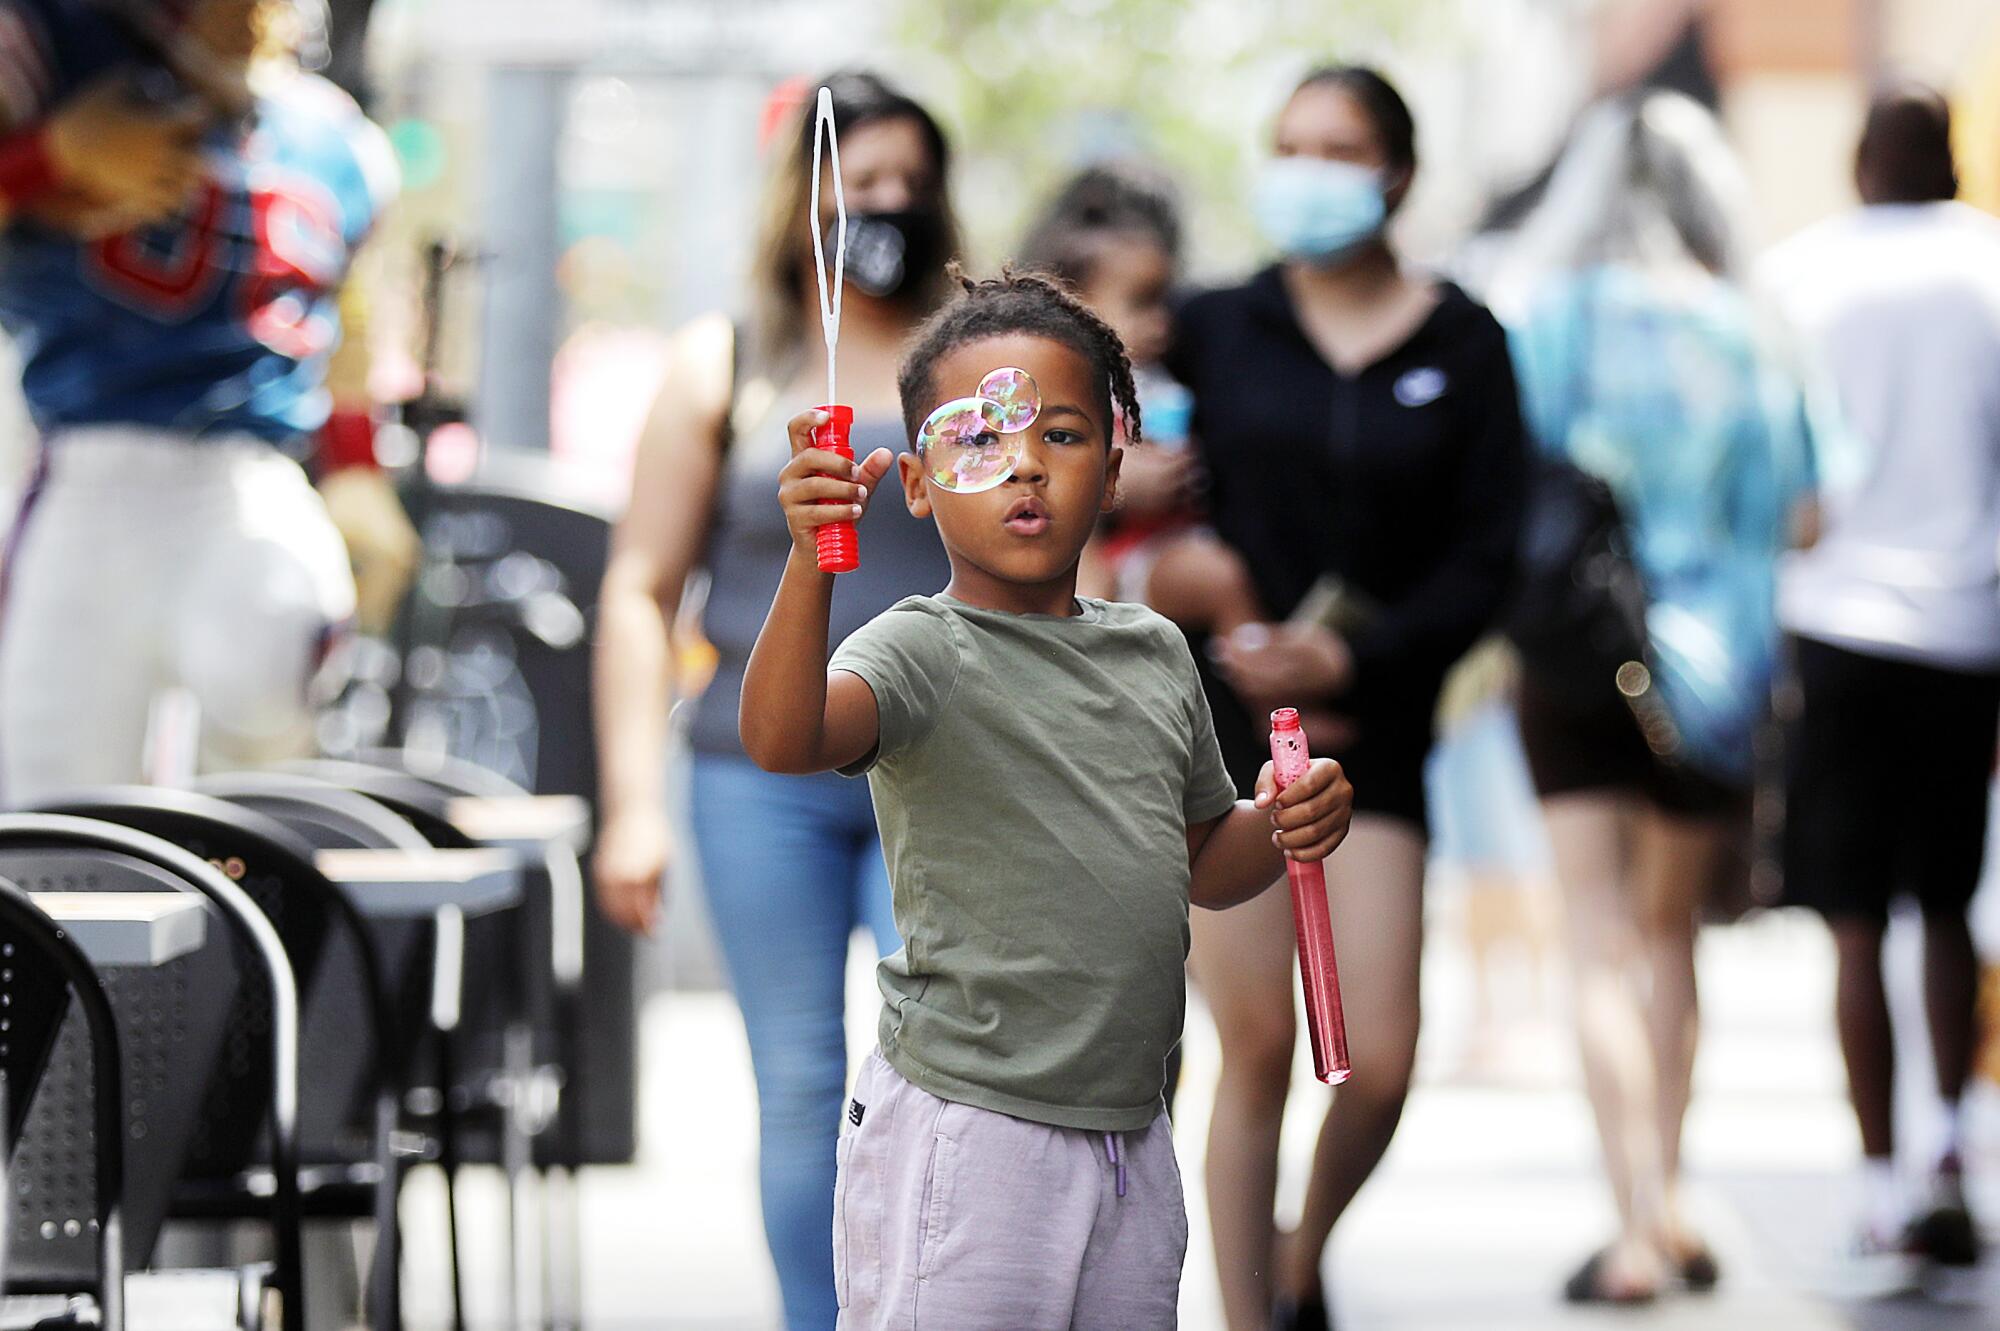 Tobias Blackmon, 6, plays with bubbles on Second Street in Belmont Shore on Tuesday, June 15, 2021.